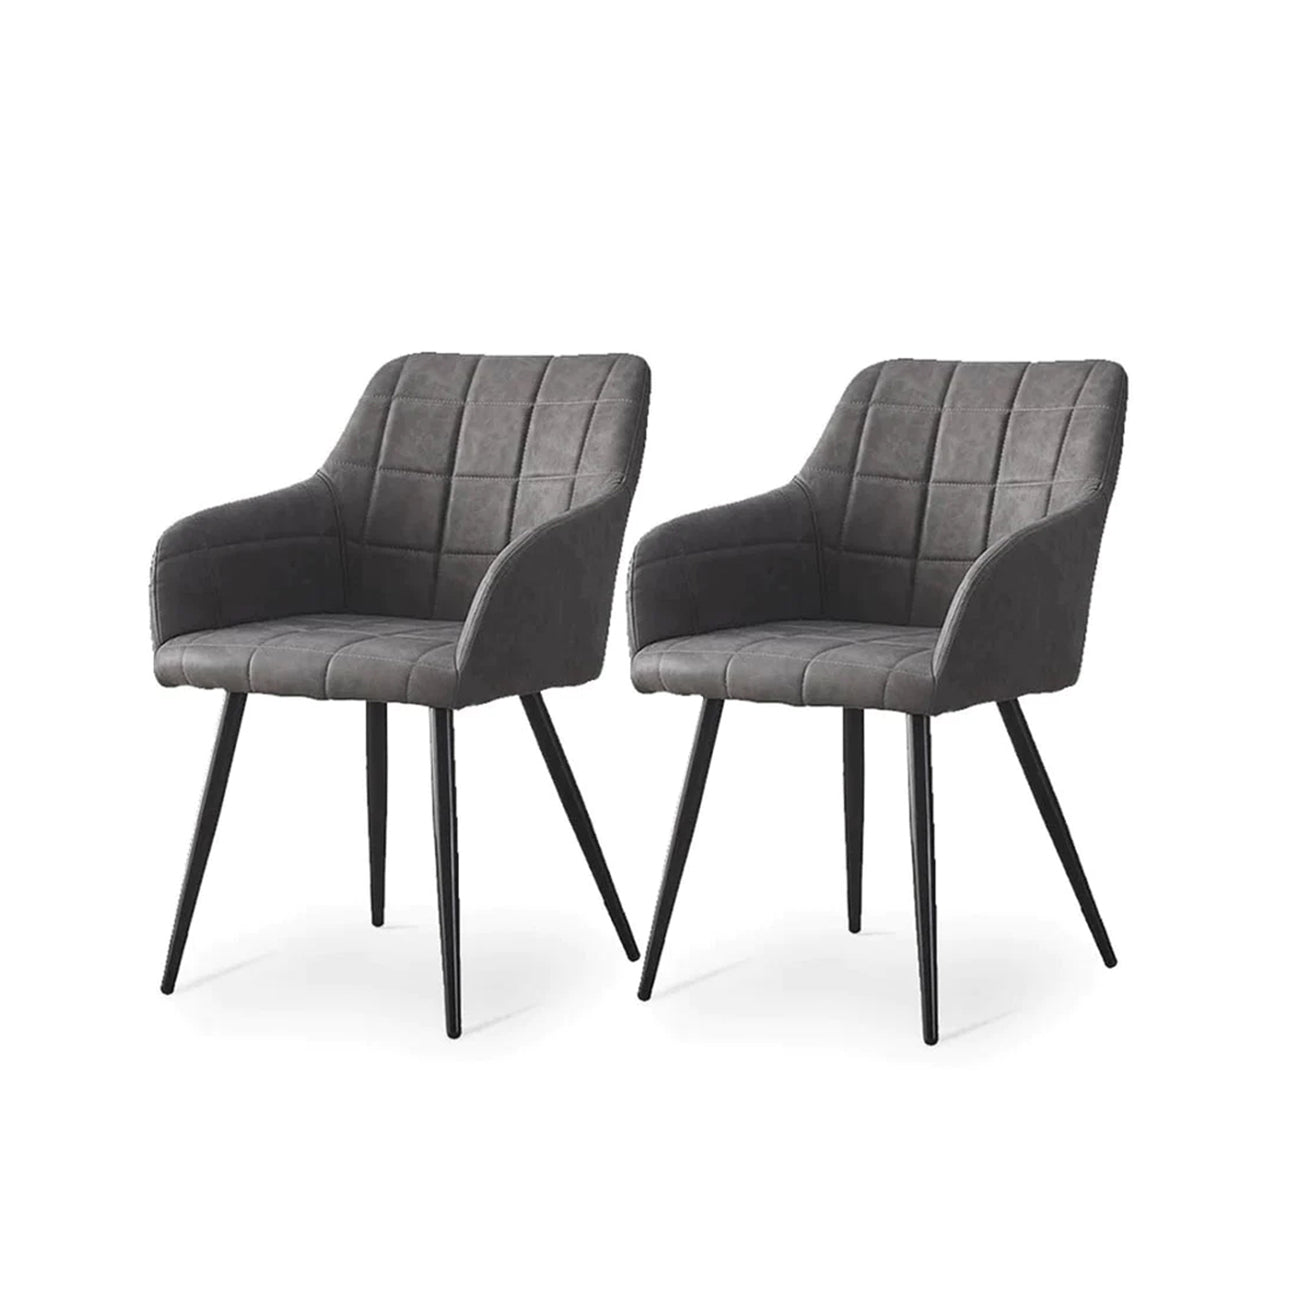 Frazer Dining Chairs [Set of 2] [Pu Leather]